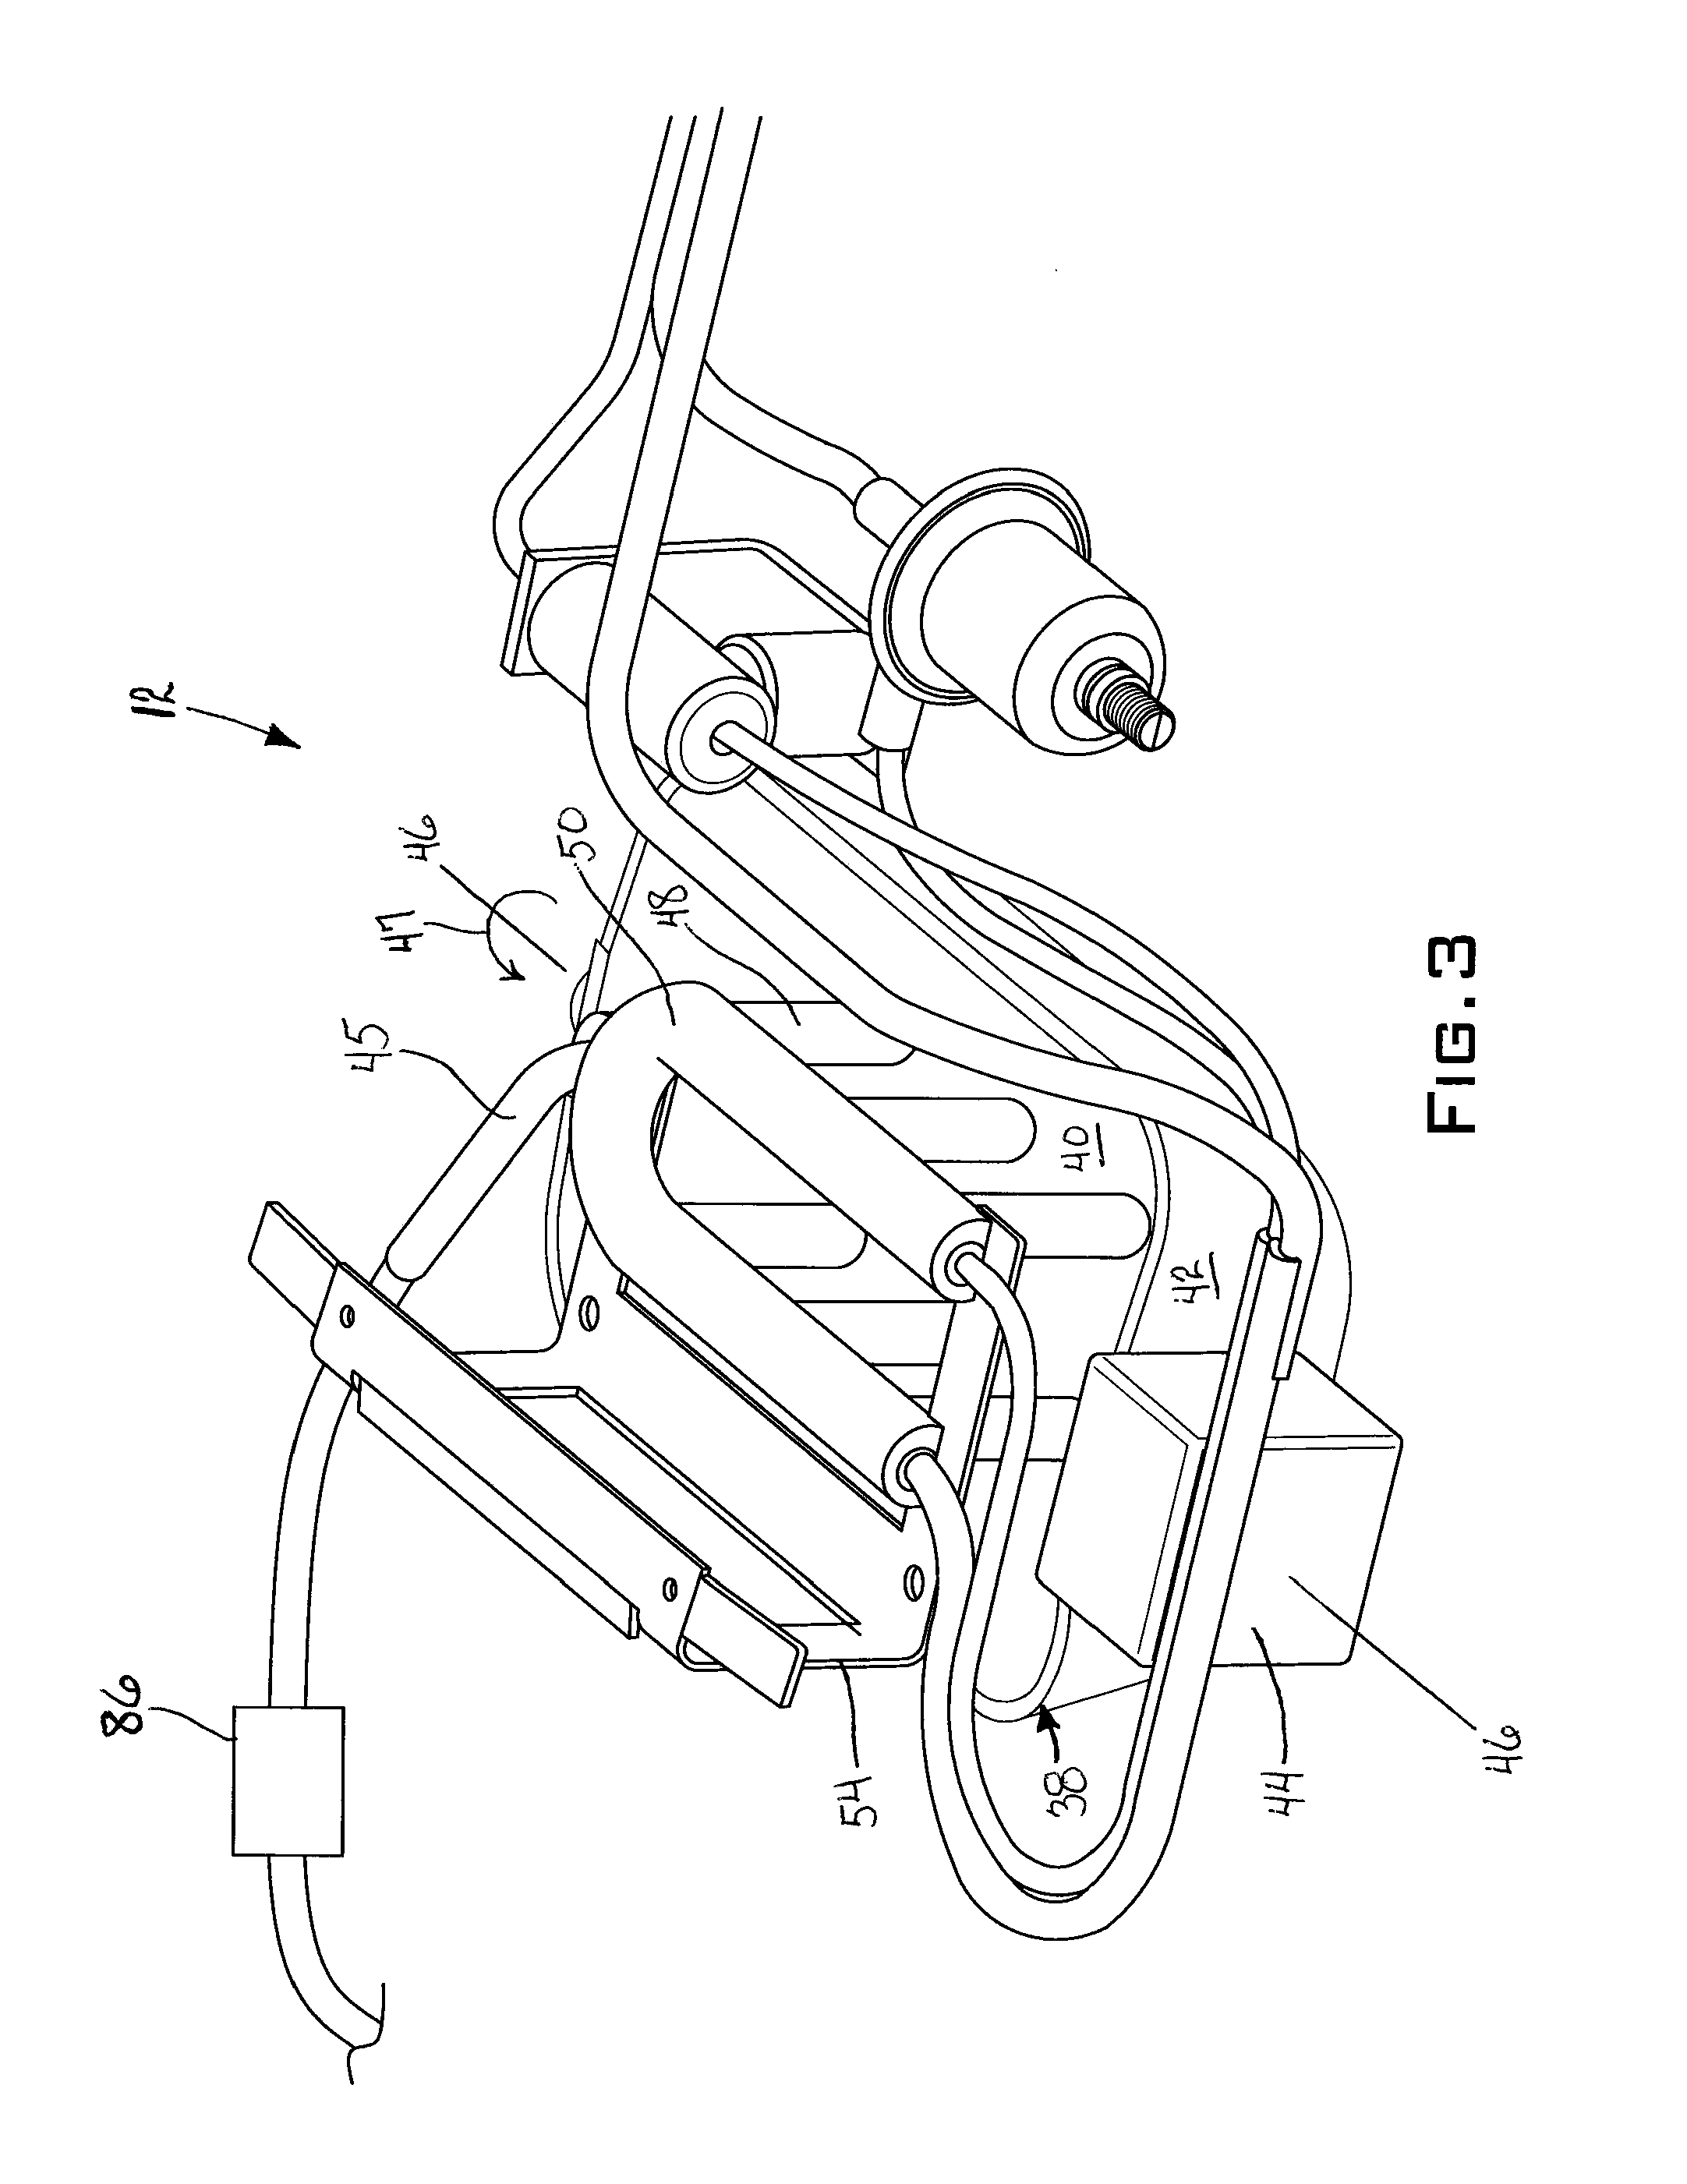 Method and apparatus for making clear ice